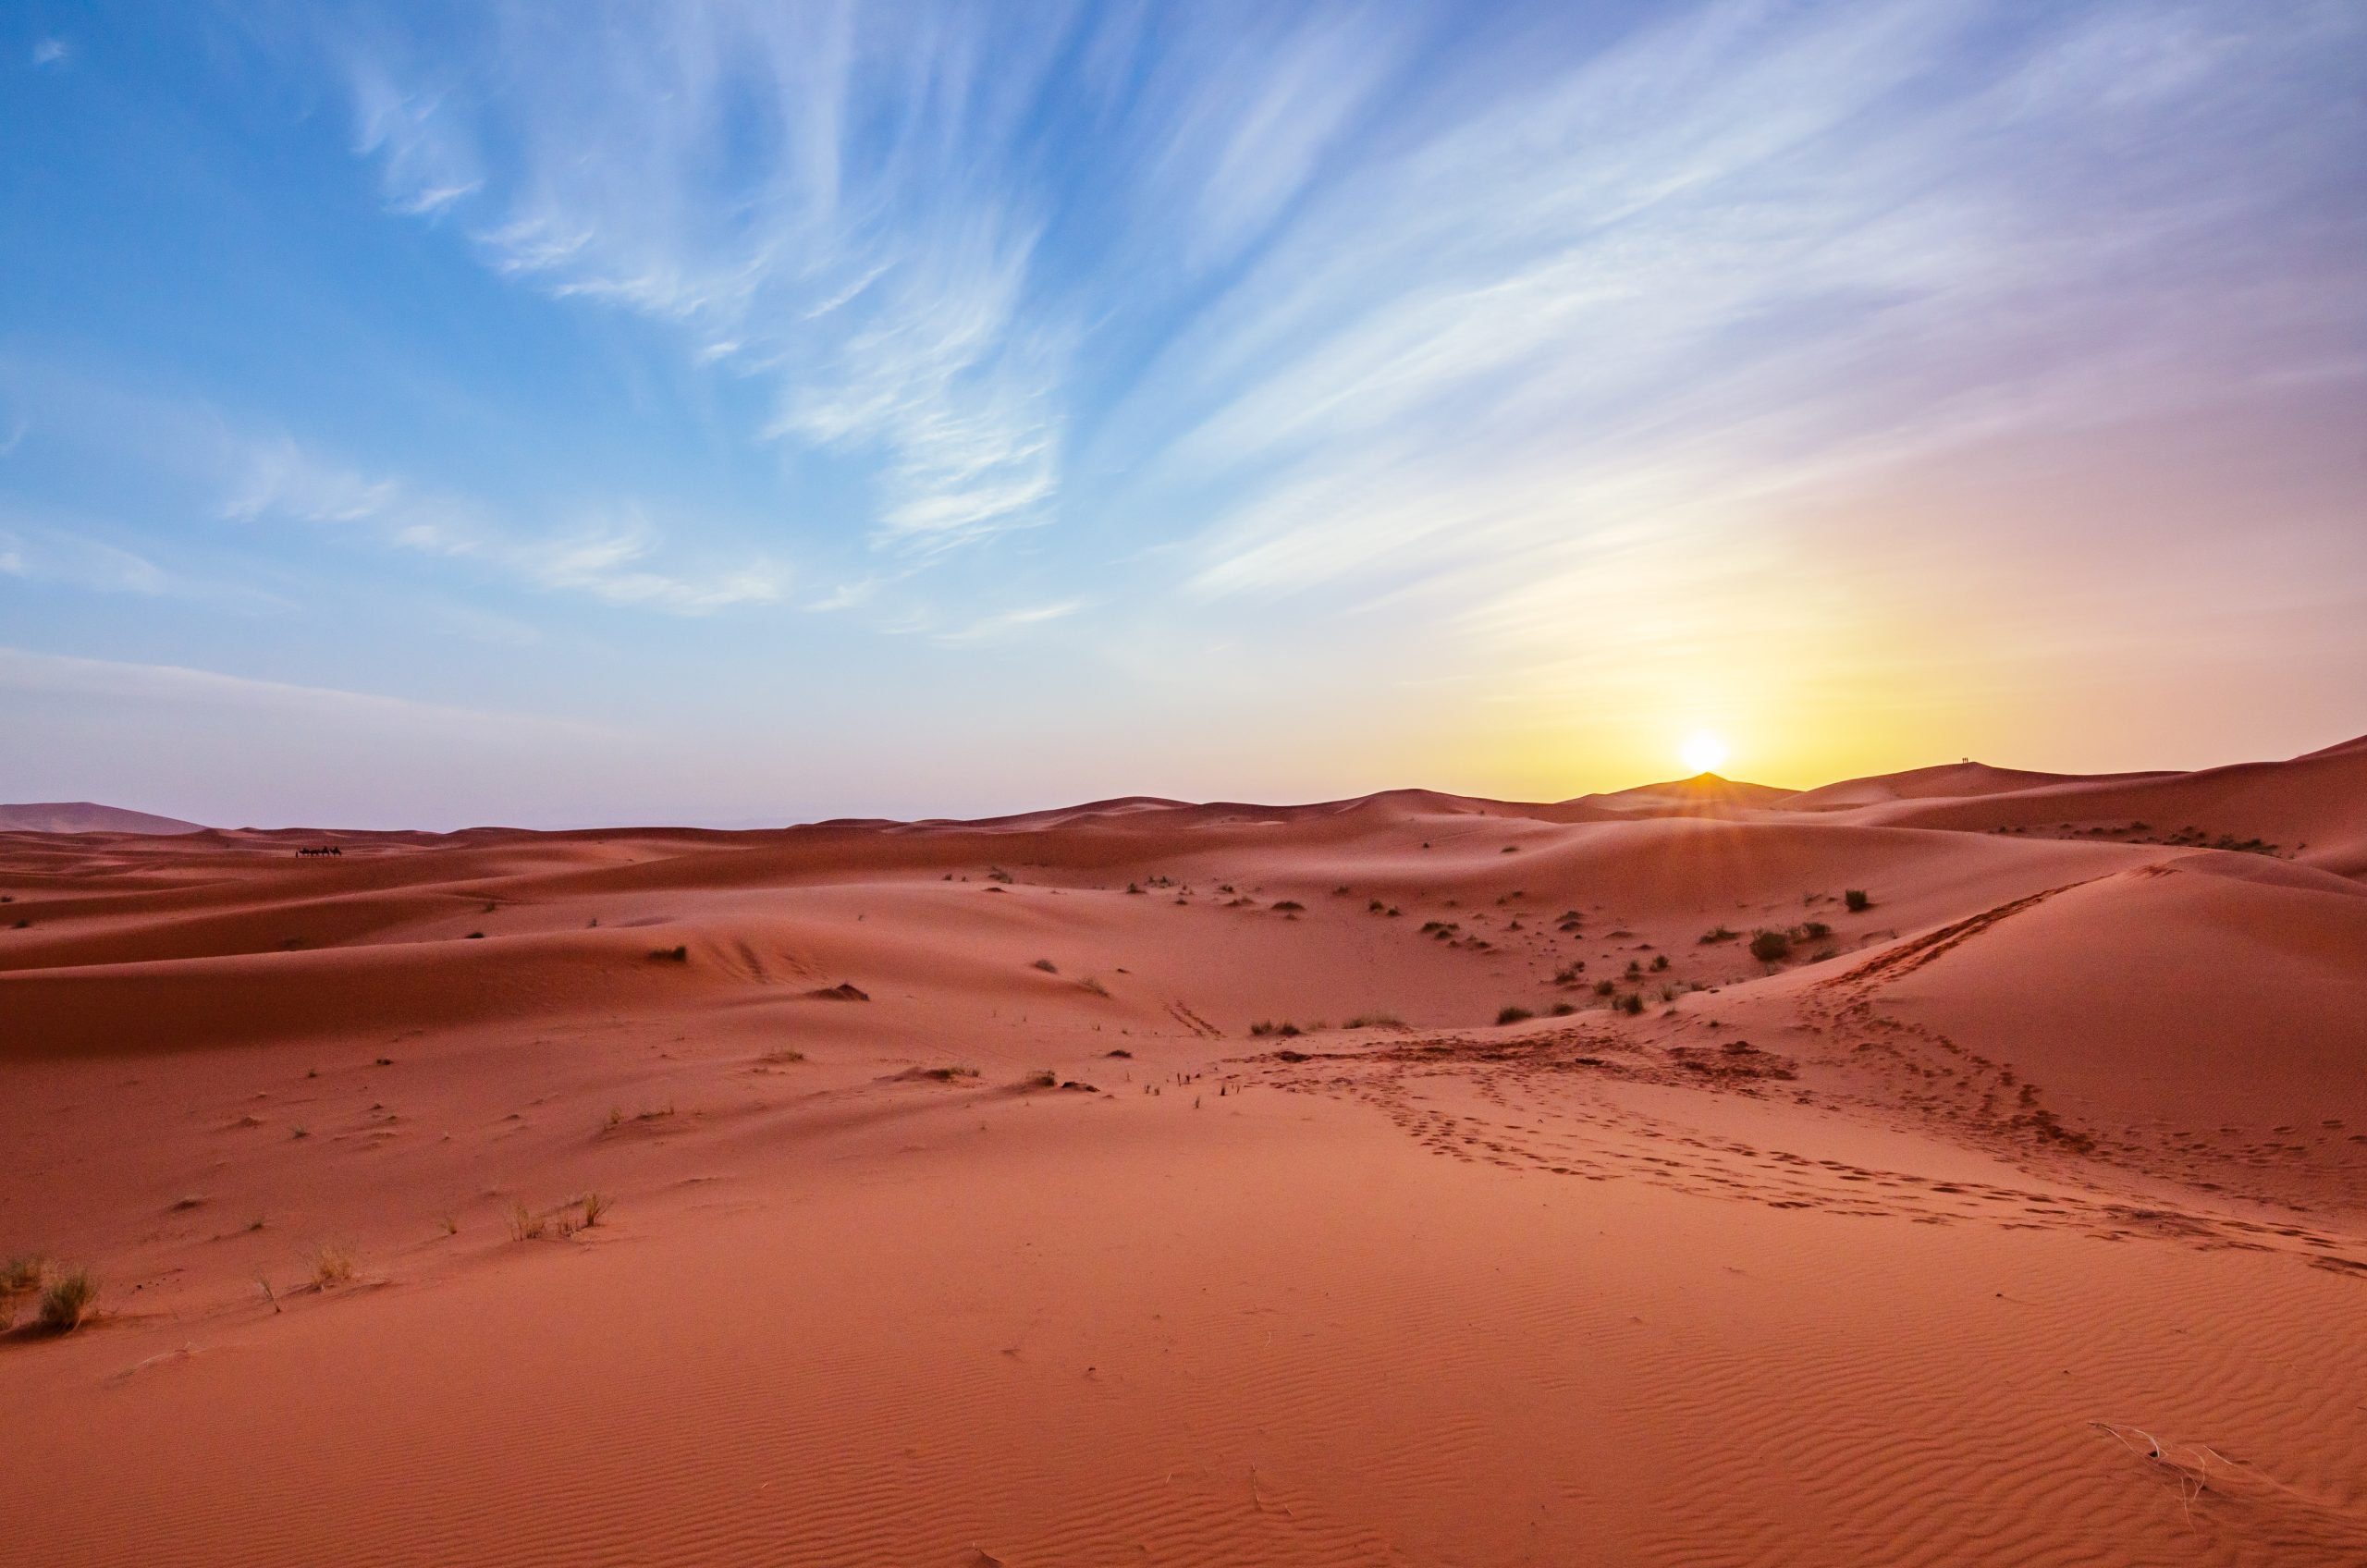 A landscape of sand dunes with animal tracks against a sunset sky